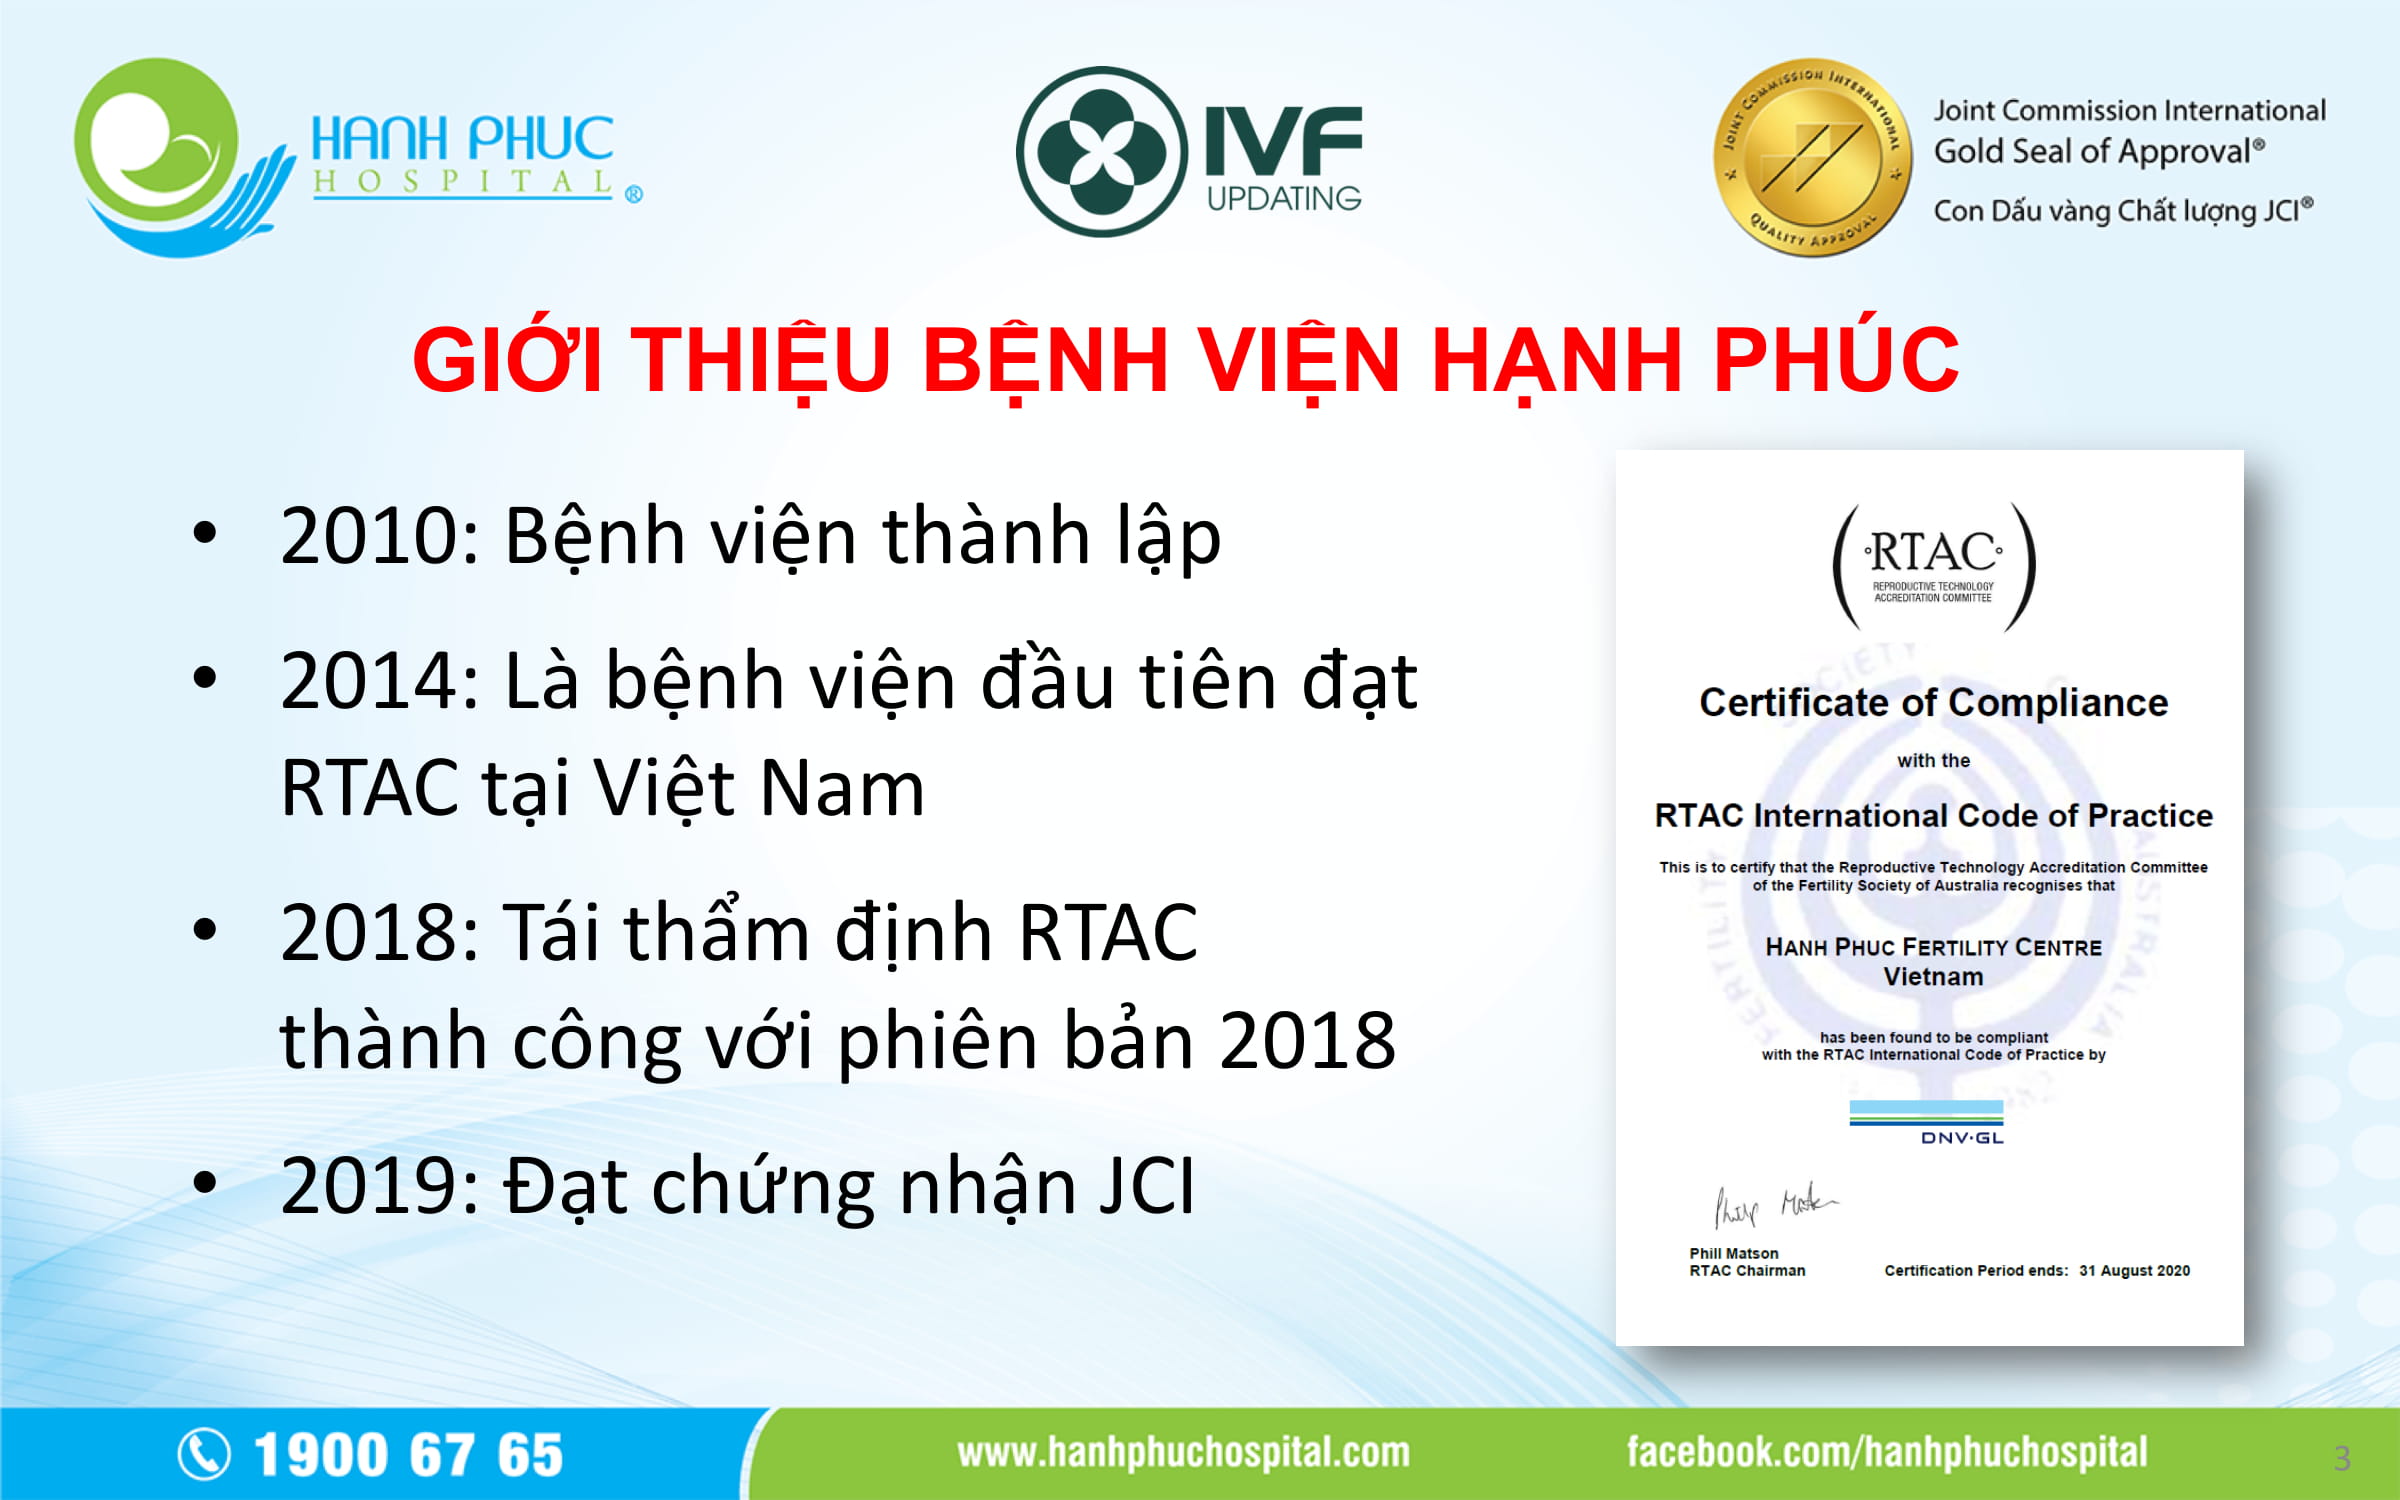 BS Vo Thien An Report_IVF UPDATING 5-03